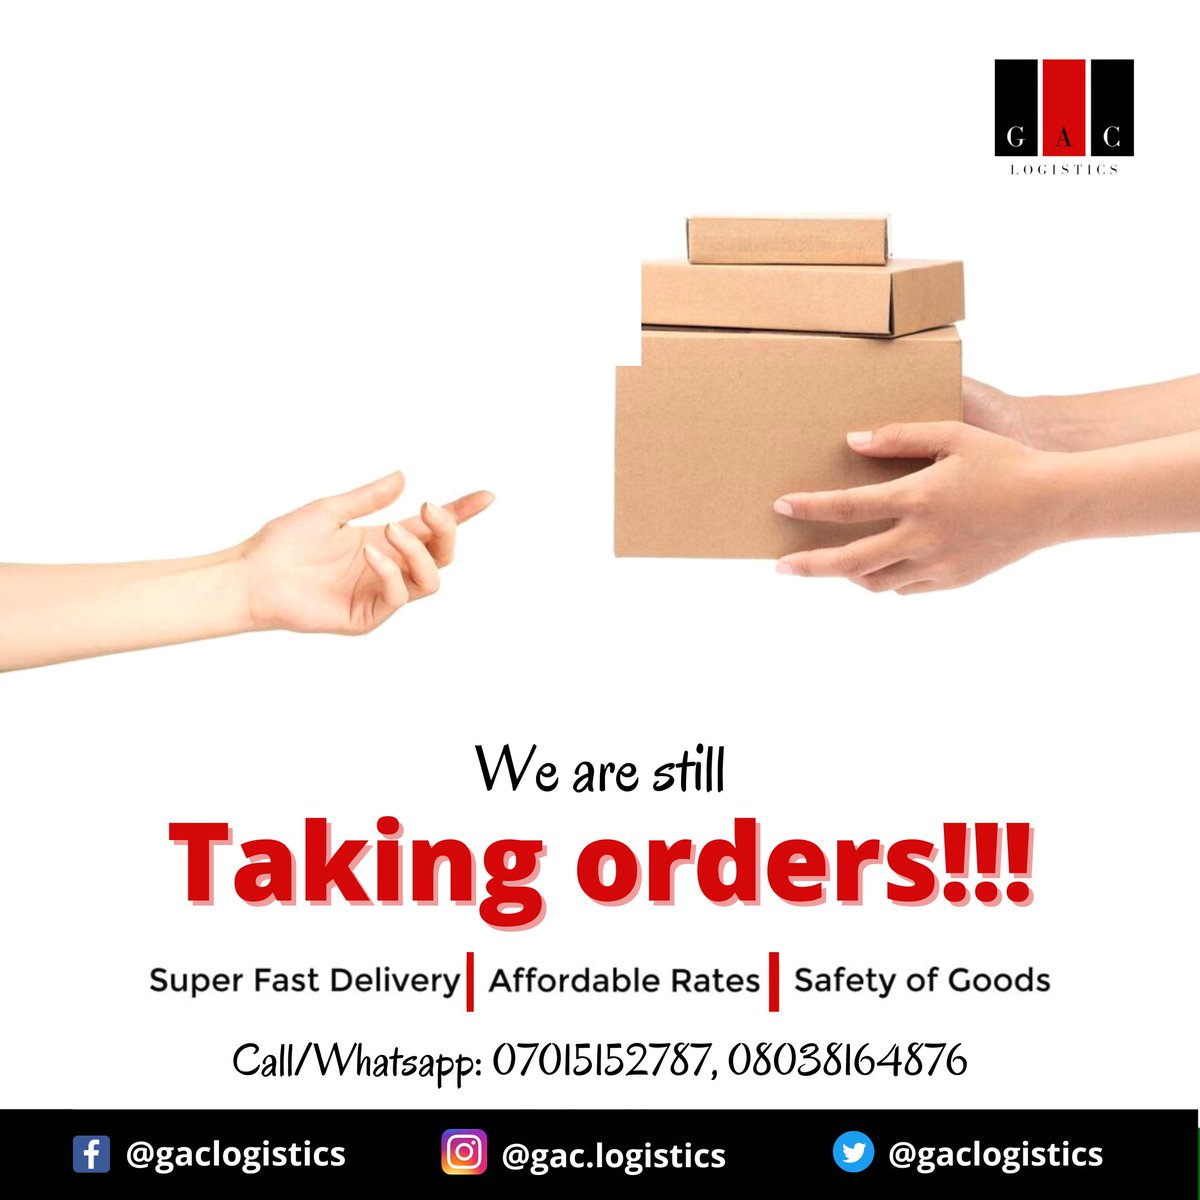 Let's make all deliveries for you while you face other aspects of your daily activities.

Send in your delivery request today.

Call or Whatsapp us on 07015152787, 08038164876 today.

#dispatchers #dispatchrider